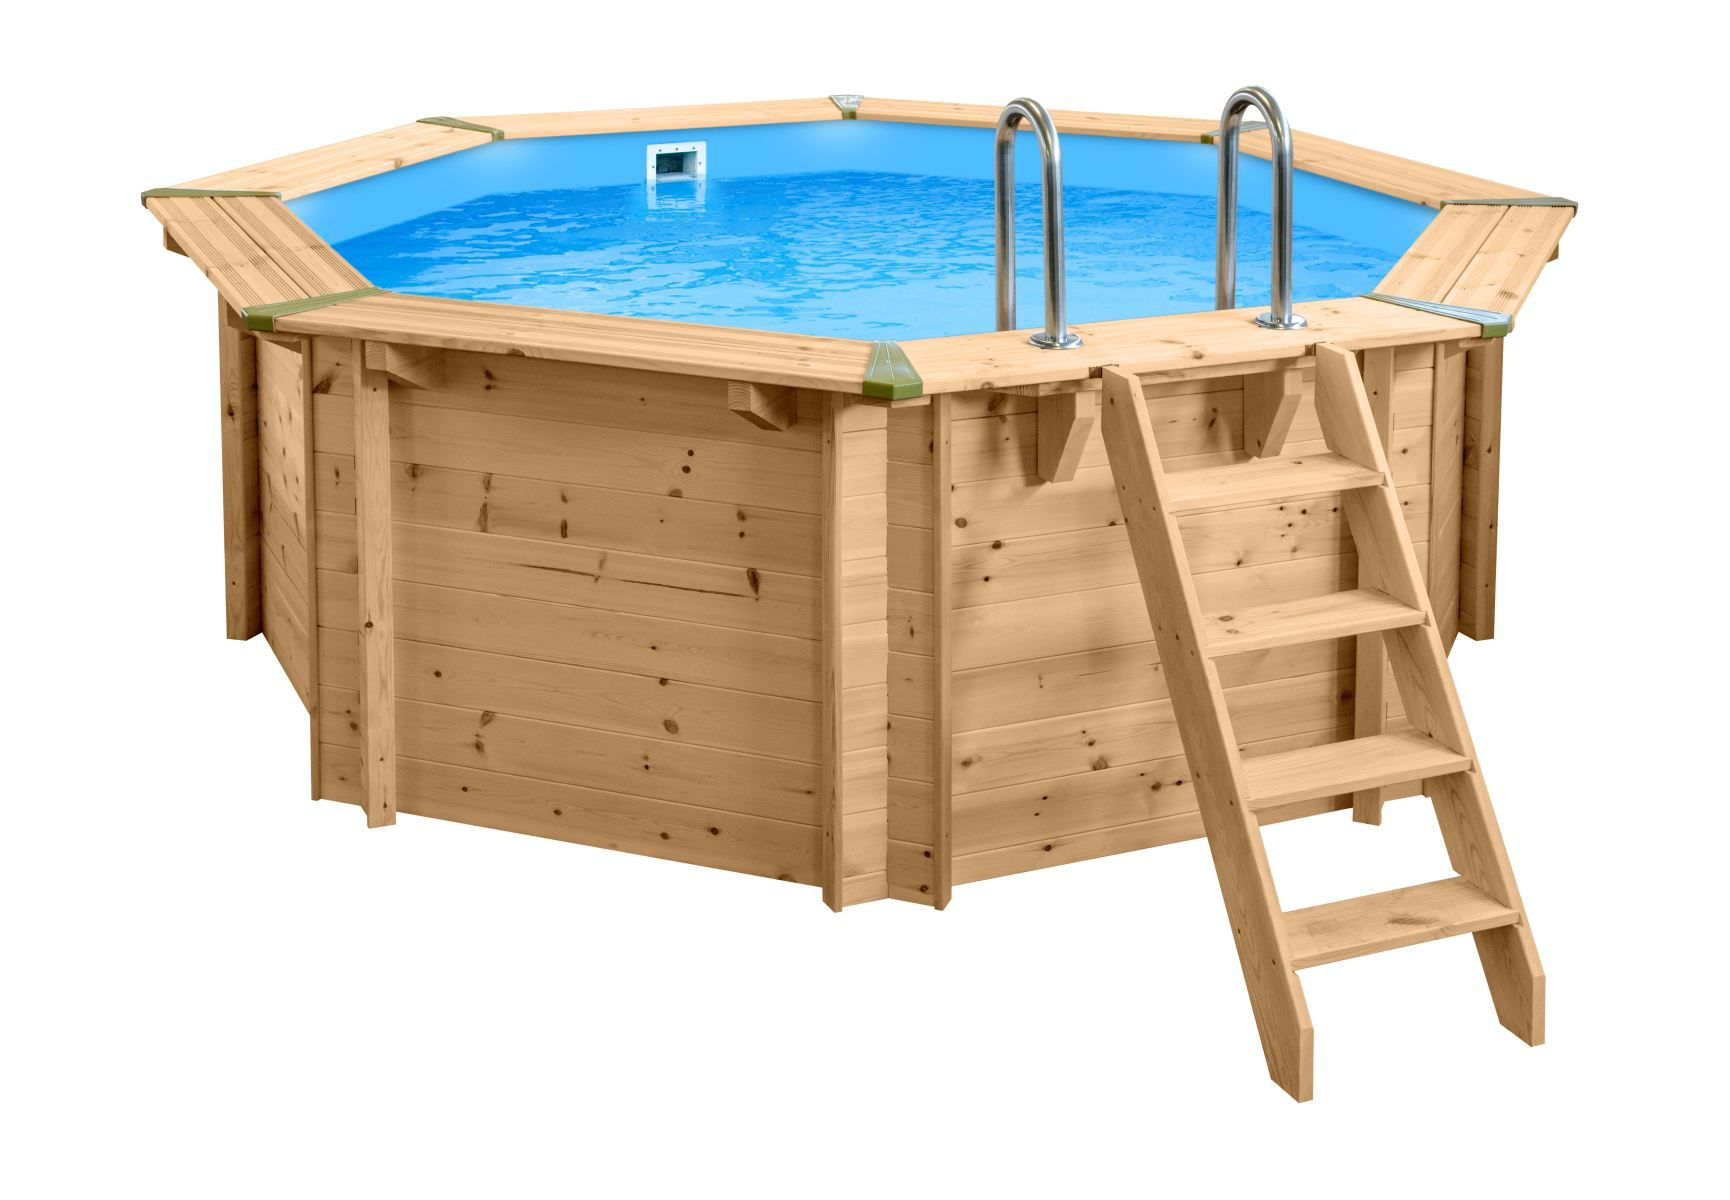 Octagonal Sunnydream 02 above-ground pool, 3.55 x 1.16 meters, including premium filter system, filter medium, pool ladder, pool liner, floor and wall fleece, stainless steel corner joints